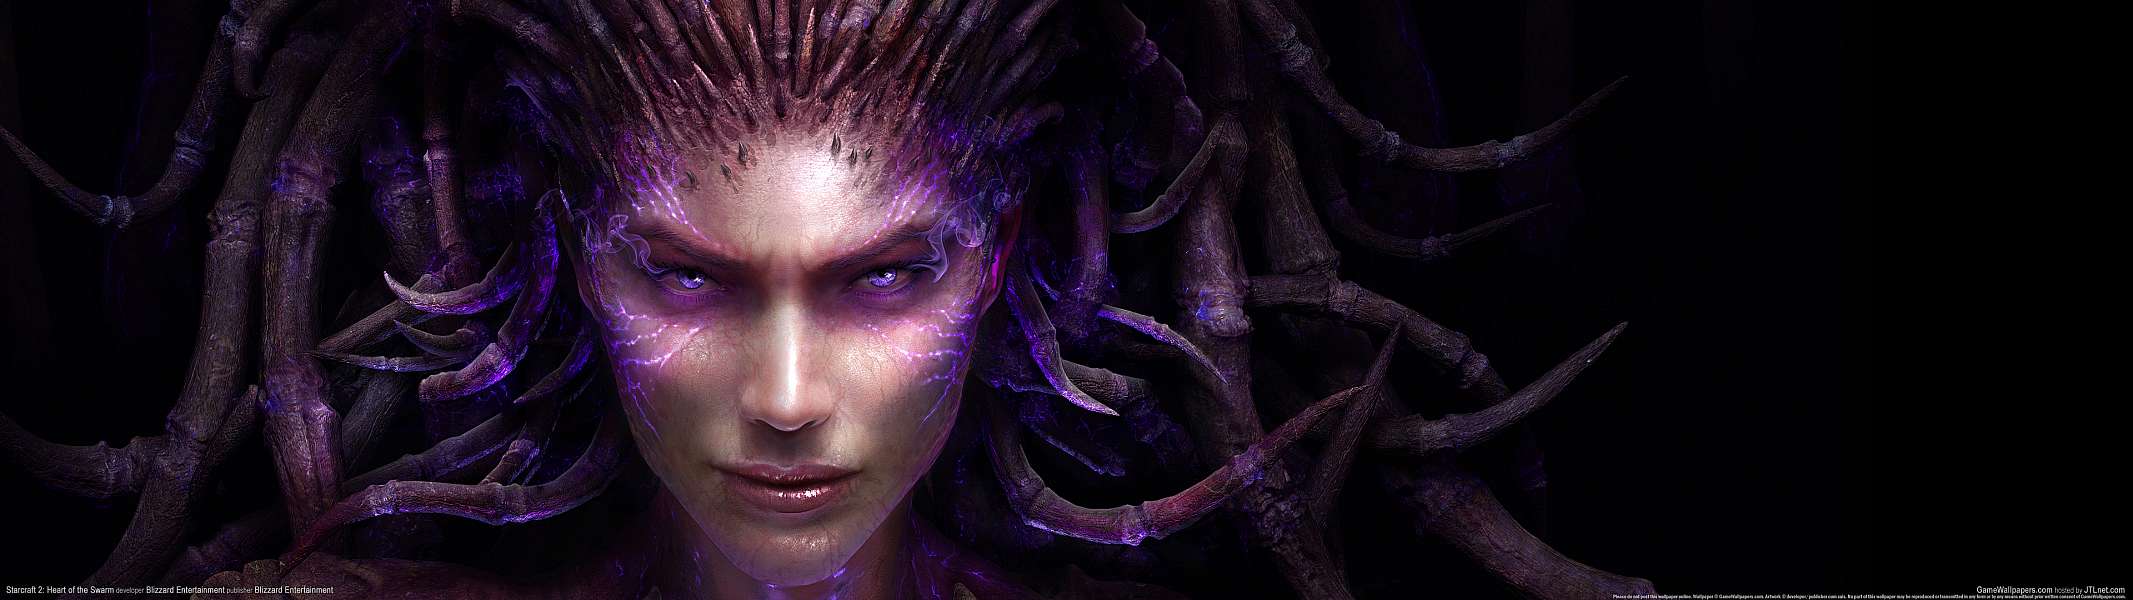 StarCraft 2: Heart of the Swarm dual screen wallpaper or background